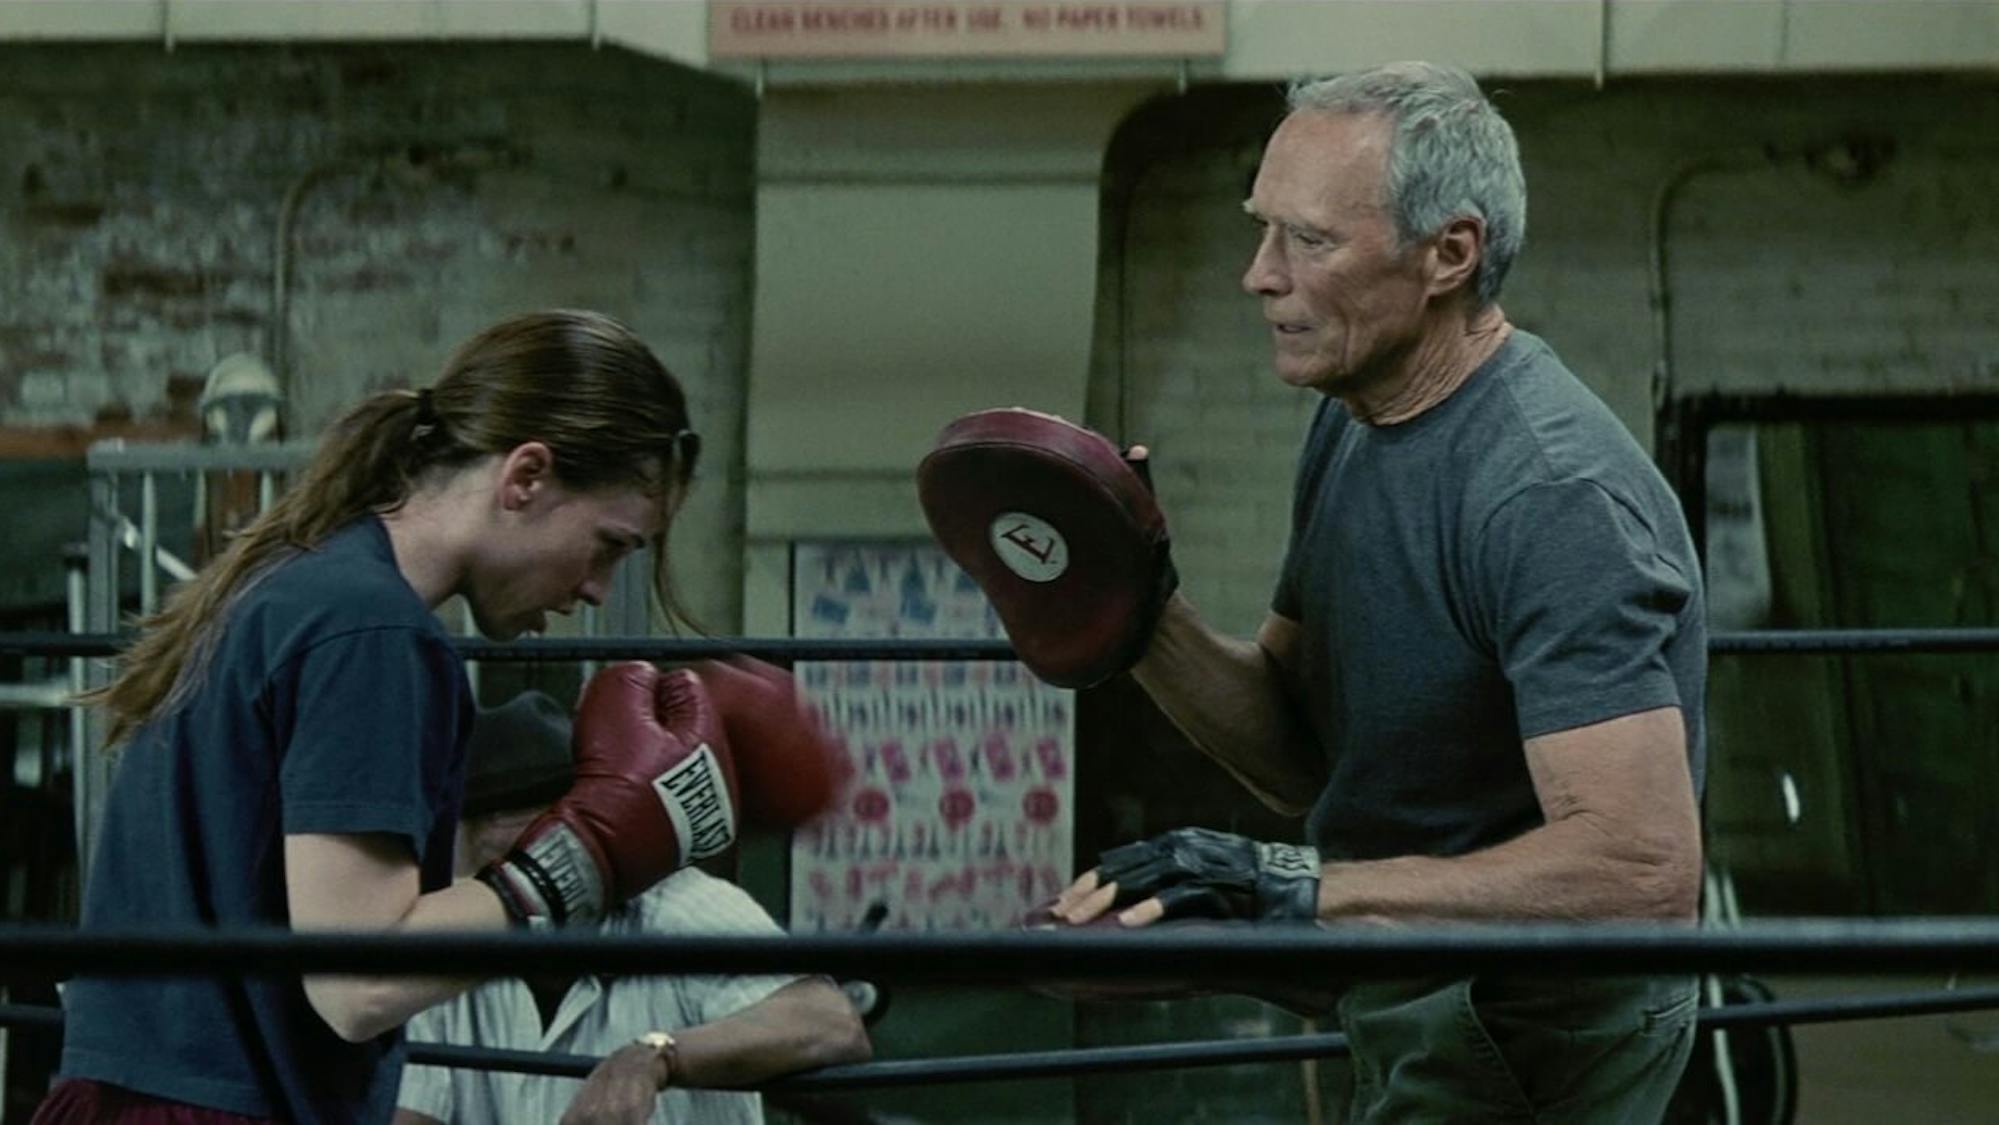 Maggie Fitzgerald (Hilary Swank) and Frankie Dunn (Clint Eastwood) face each other in the gym’s ring. They both wear grey and look exhausted as Maggie gears up to punch Frankie’s glove.